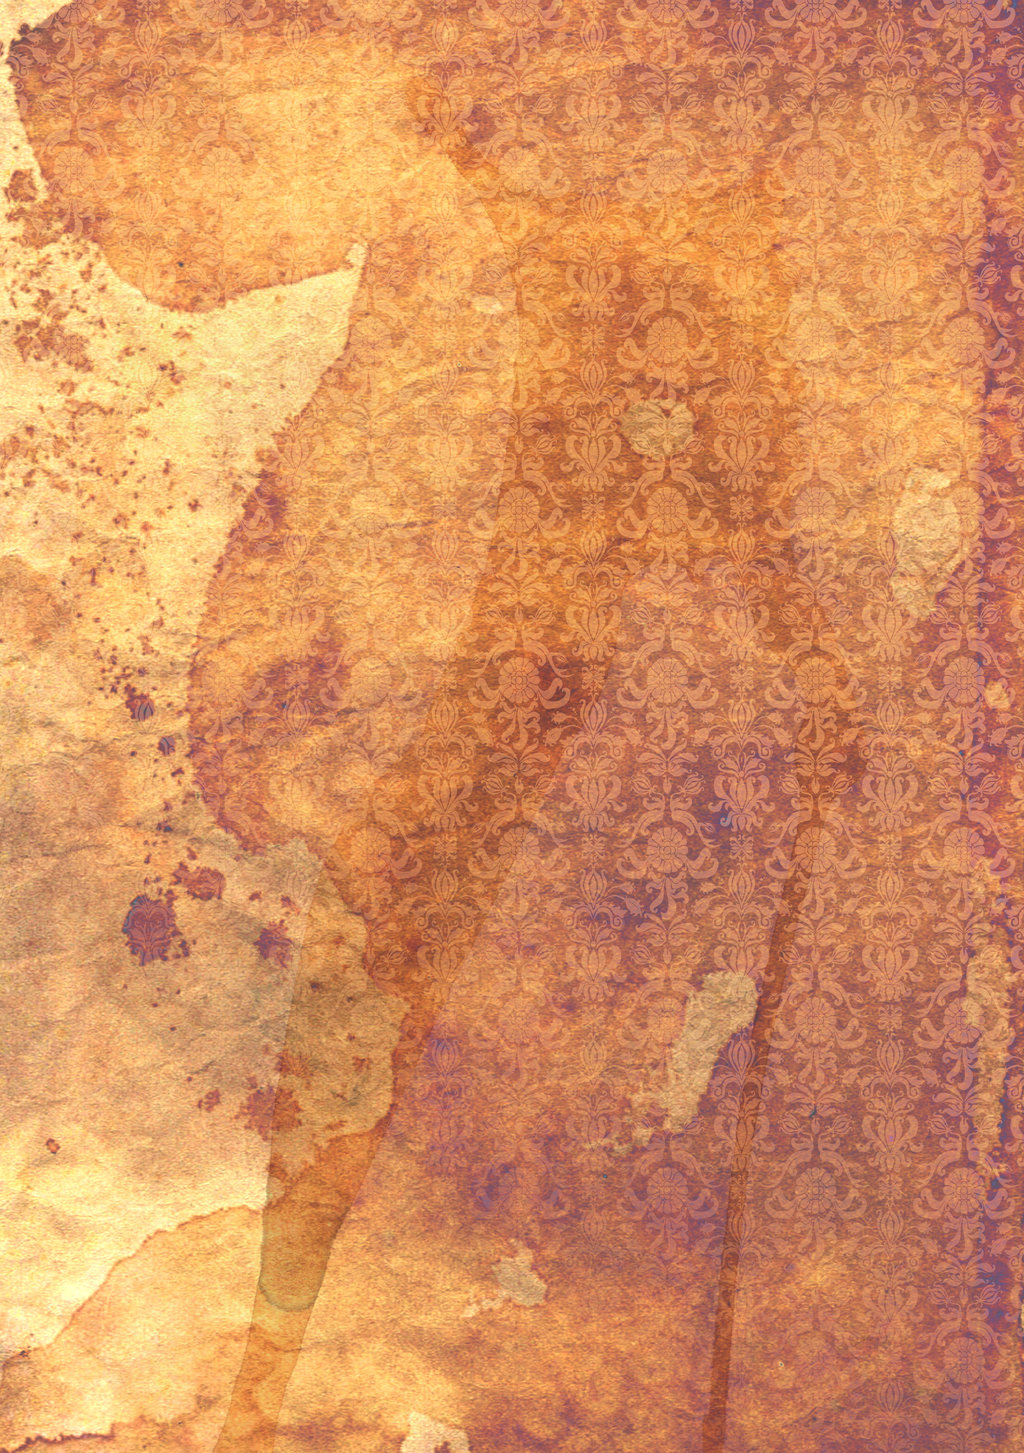 Tea Paper By Snowys Stock Resources Image Textures